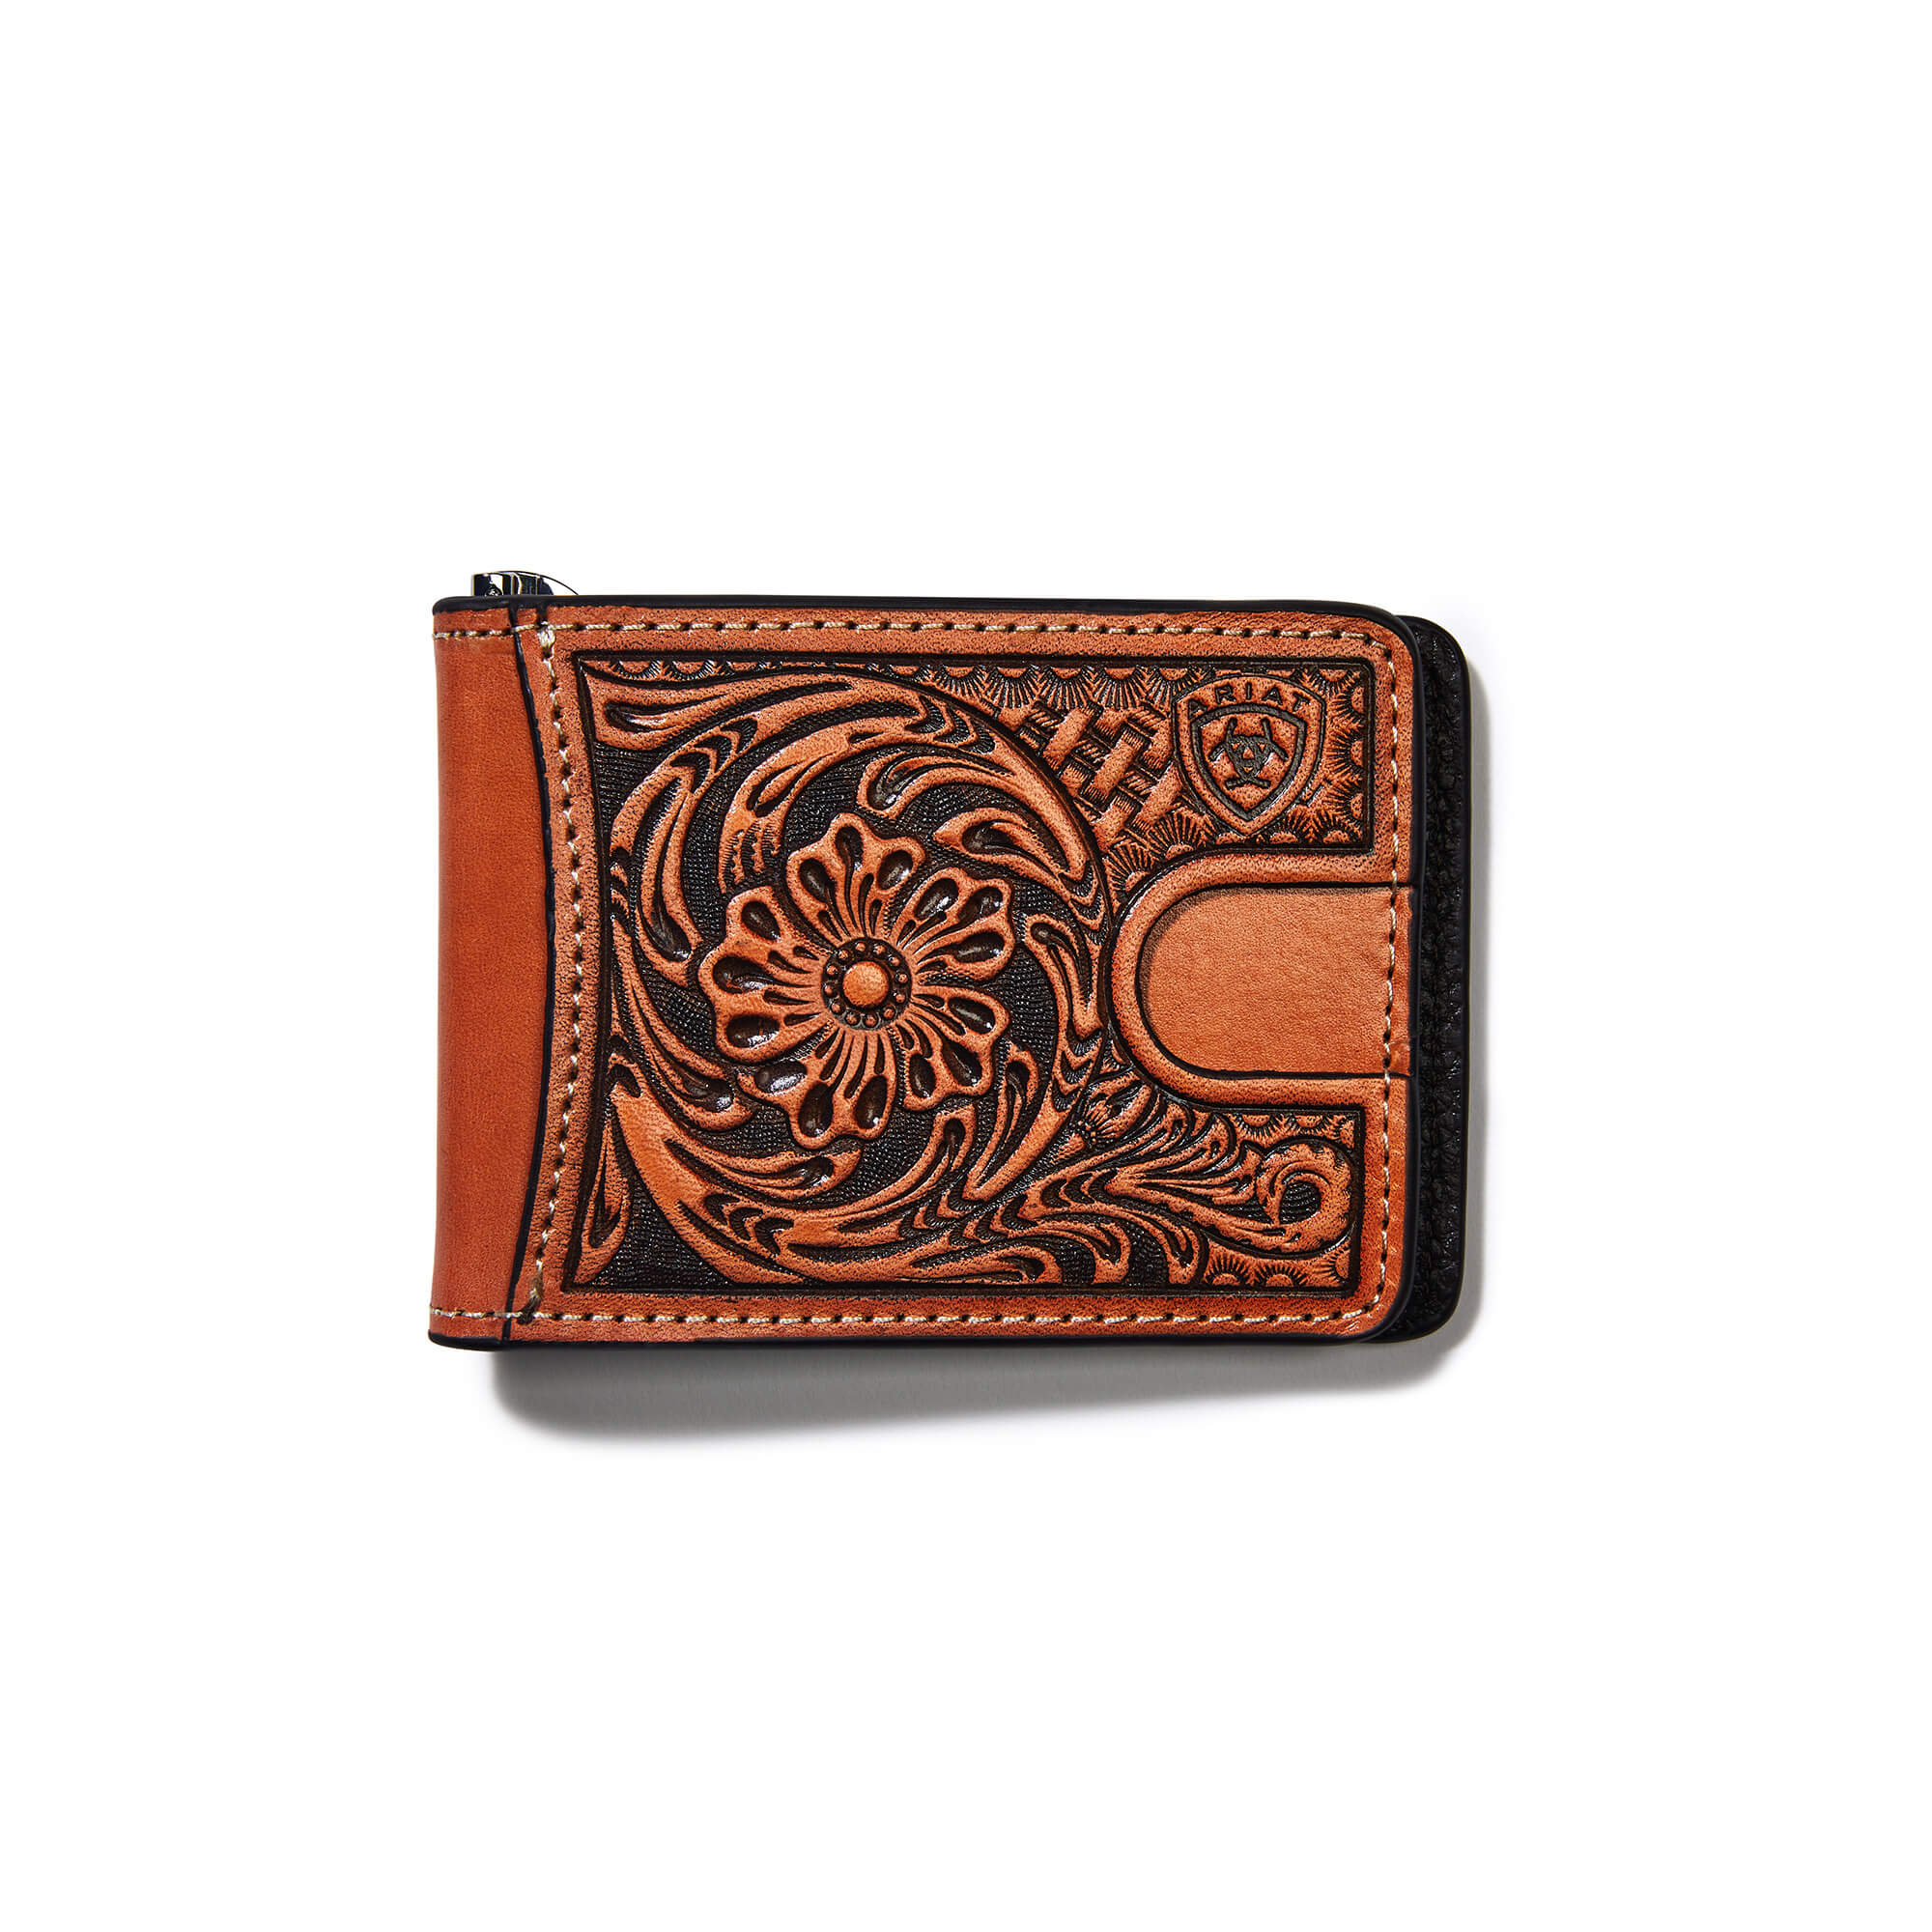 Men's Bifold Wallet Tan Floral Logo Embroidery Leather, Size: OS by Ariat